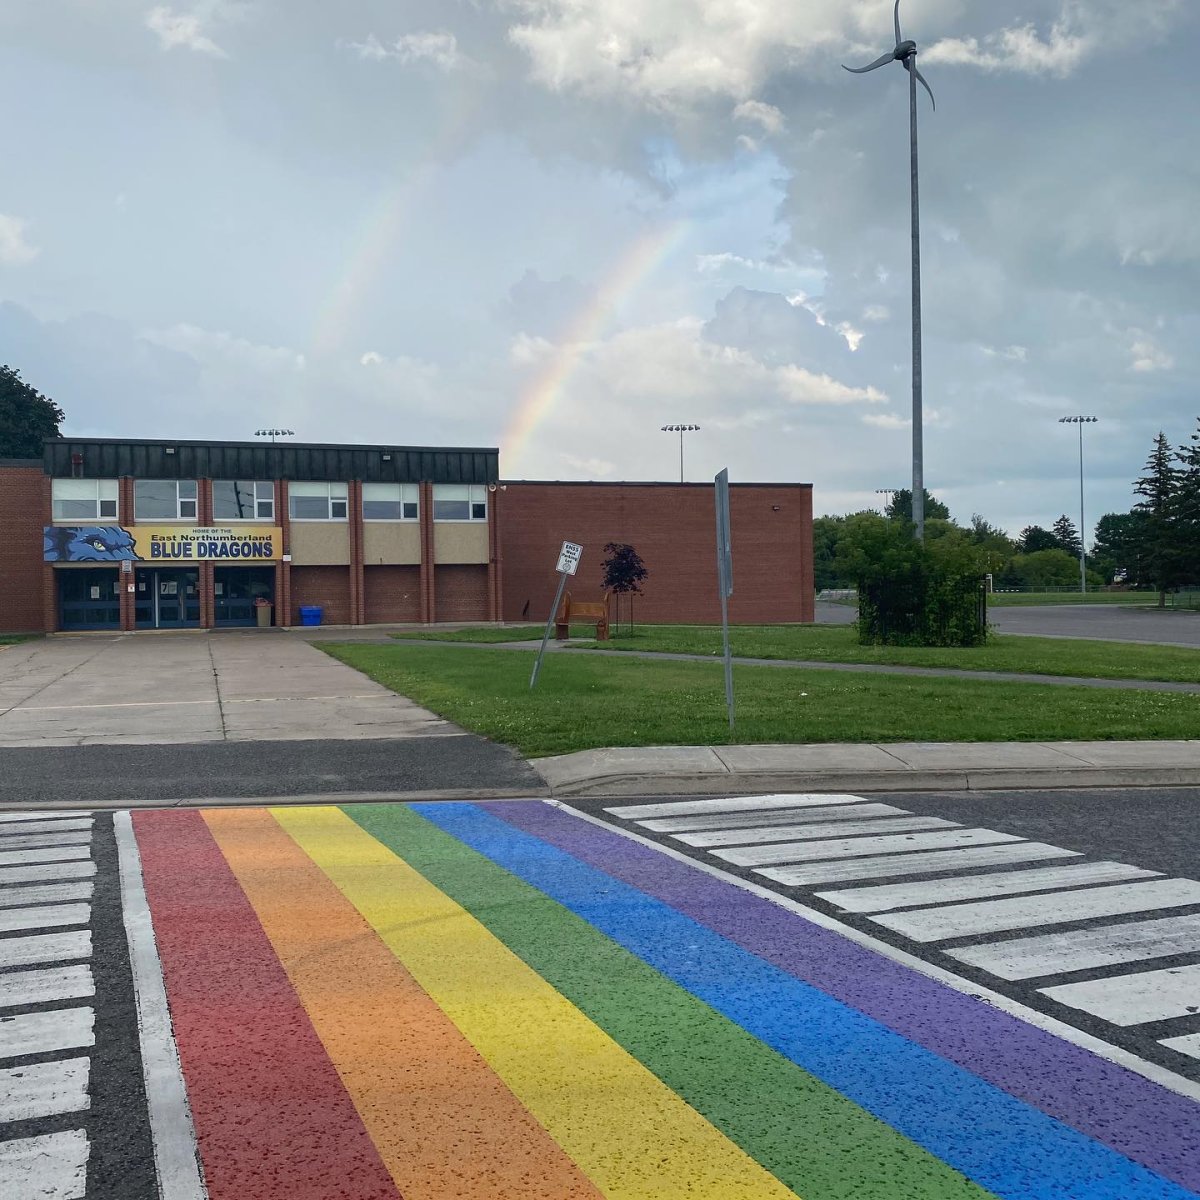 The Pride crosswalk in Brighton, Ont, seen on July 13. It was repaired after it was defaced earlier this month.